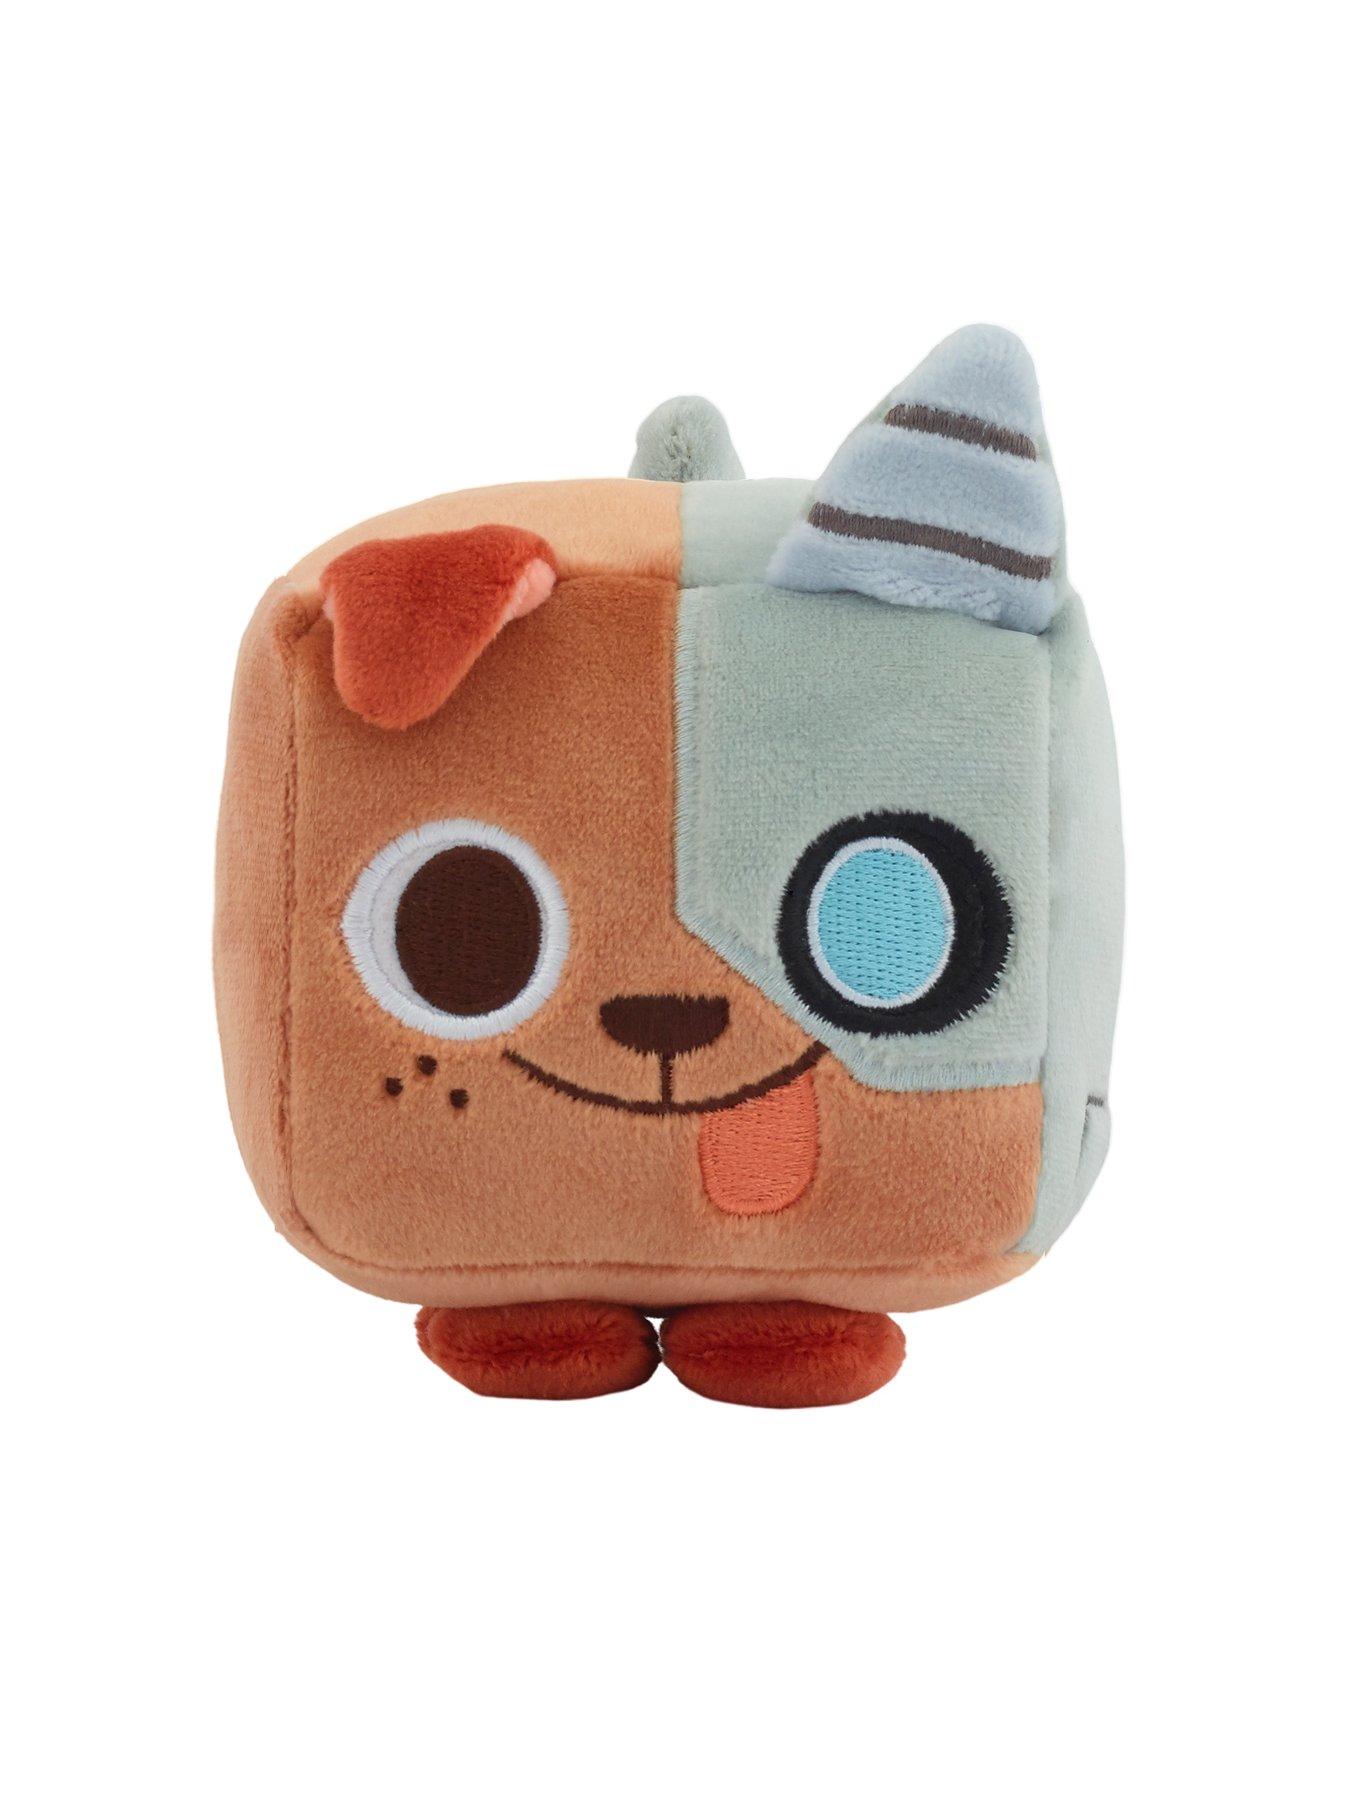 Pet Simulator Wiki Gifts & Merchandise for Sale